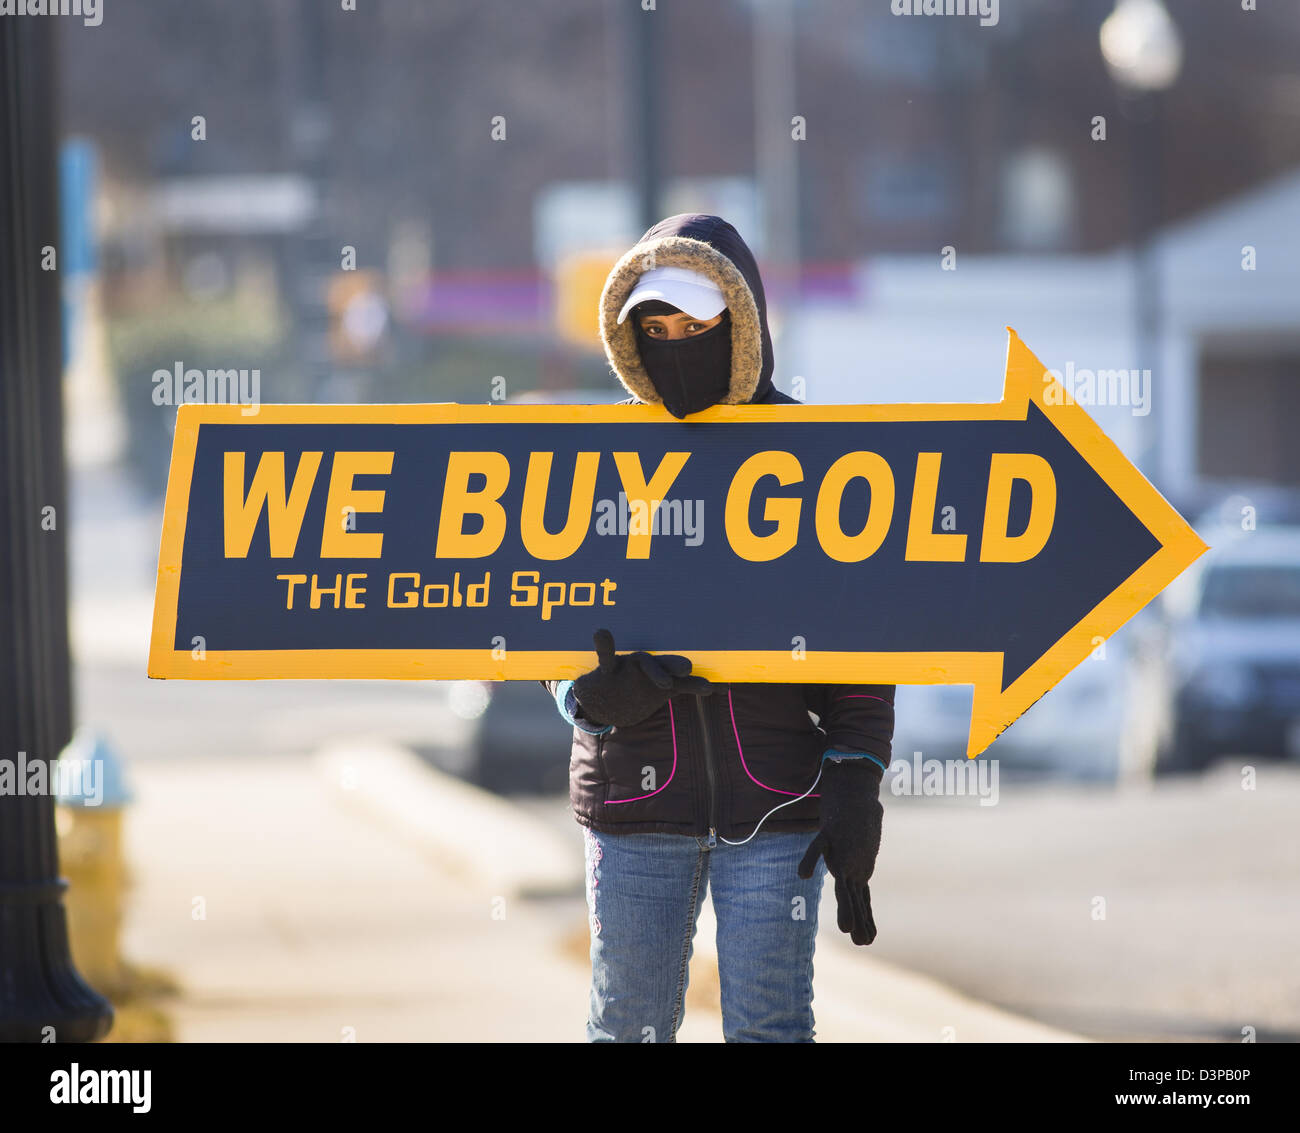 ARLINGTON, VIRGINIA, USA - Woman holds We Buy Gold sign on sidewalk to attract customers. Stock Photo